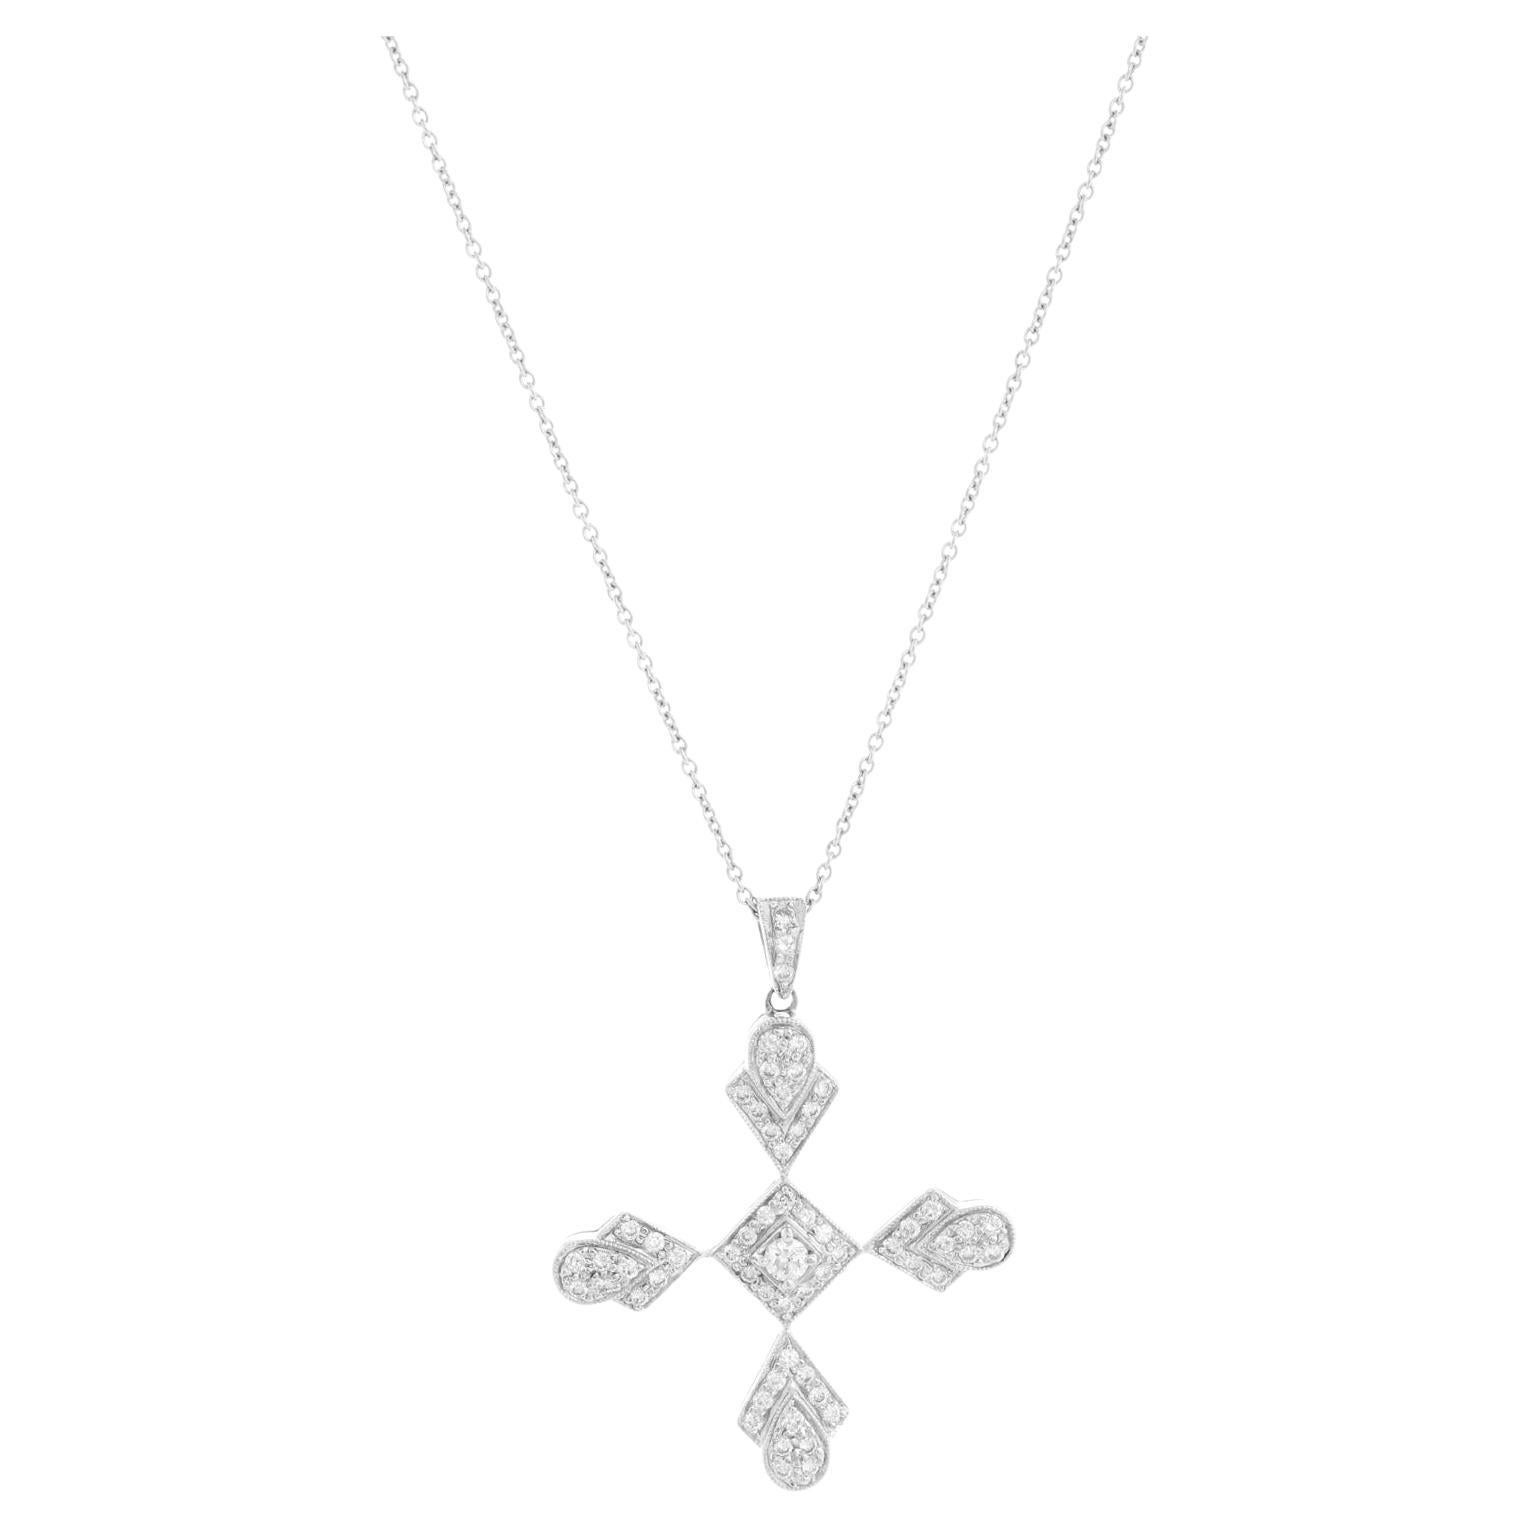 Stunning Sue Gragg 18k White Gold Diamond Cross with Necklace For Sale